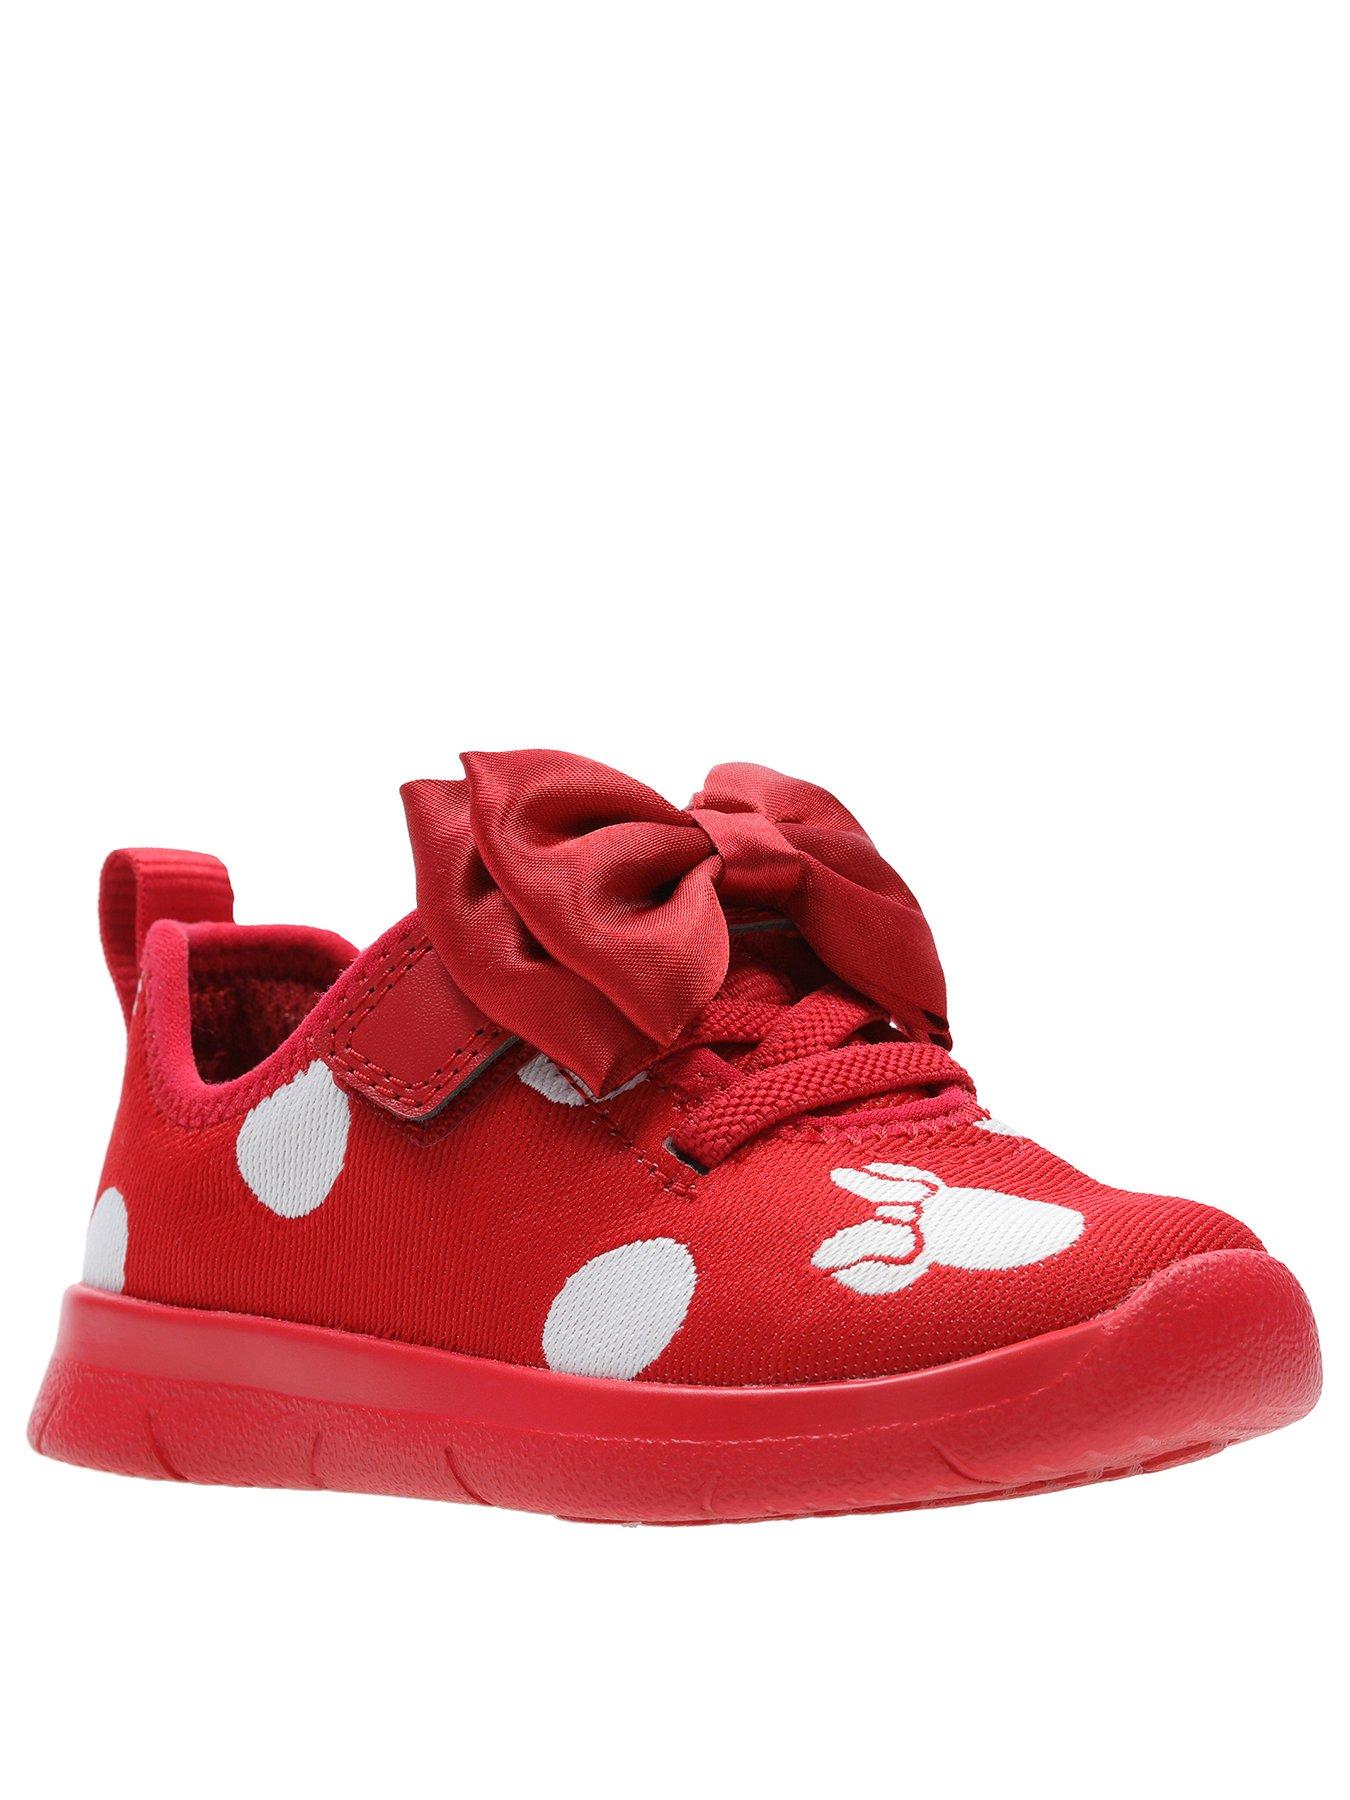 minnie mouse clarks